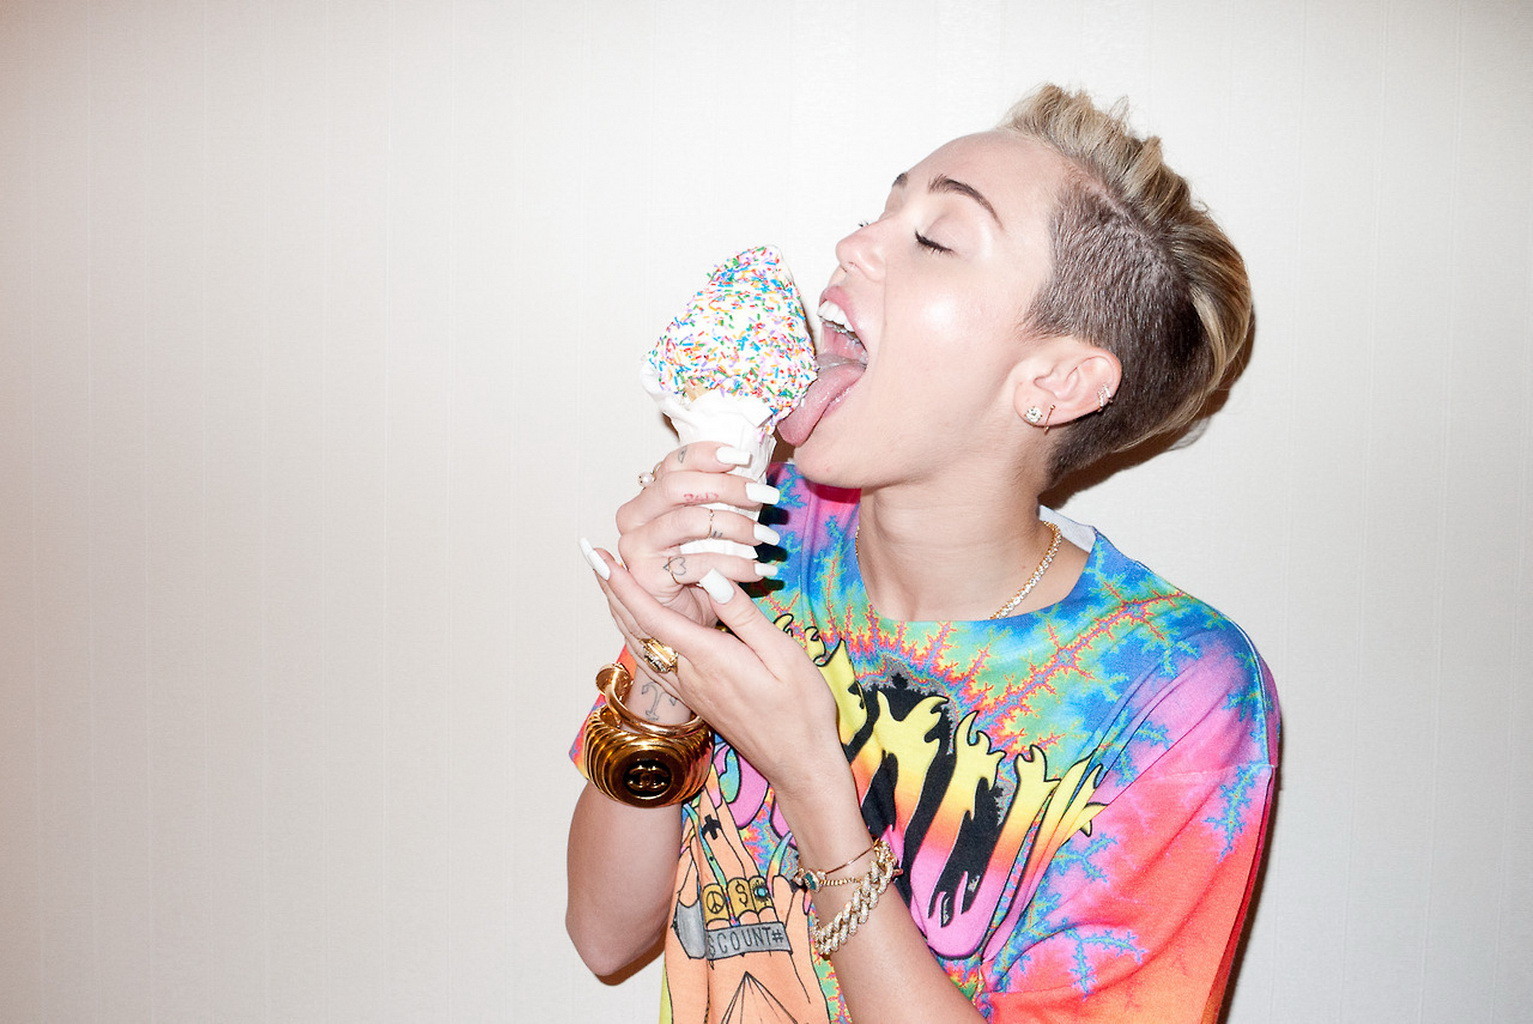 Miley Cyrus showing off her boobs  pussy in Terry Richardson photoshoot #75217395